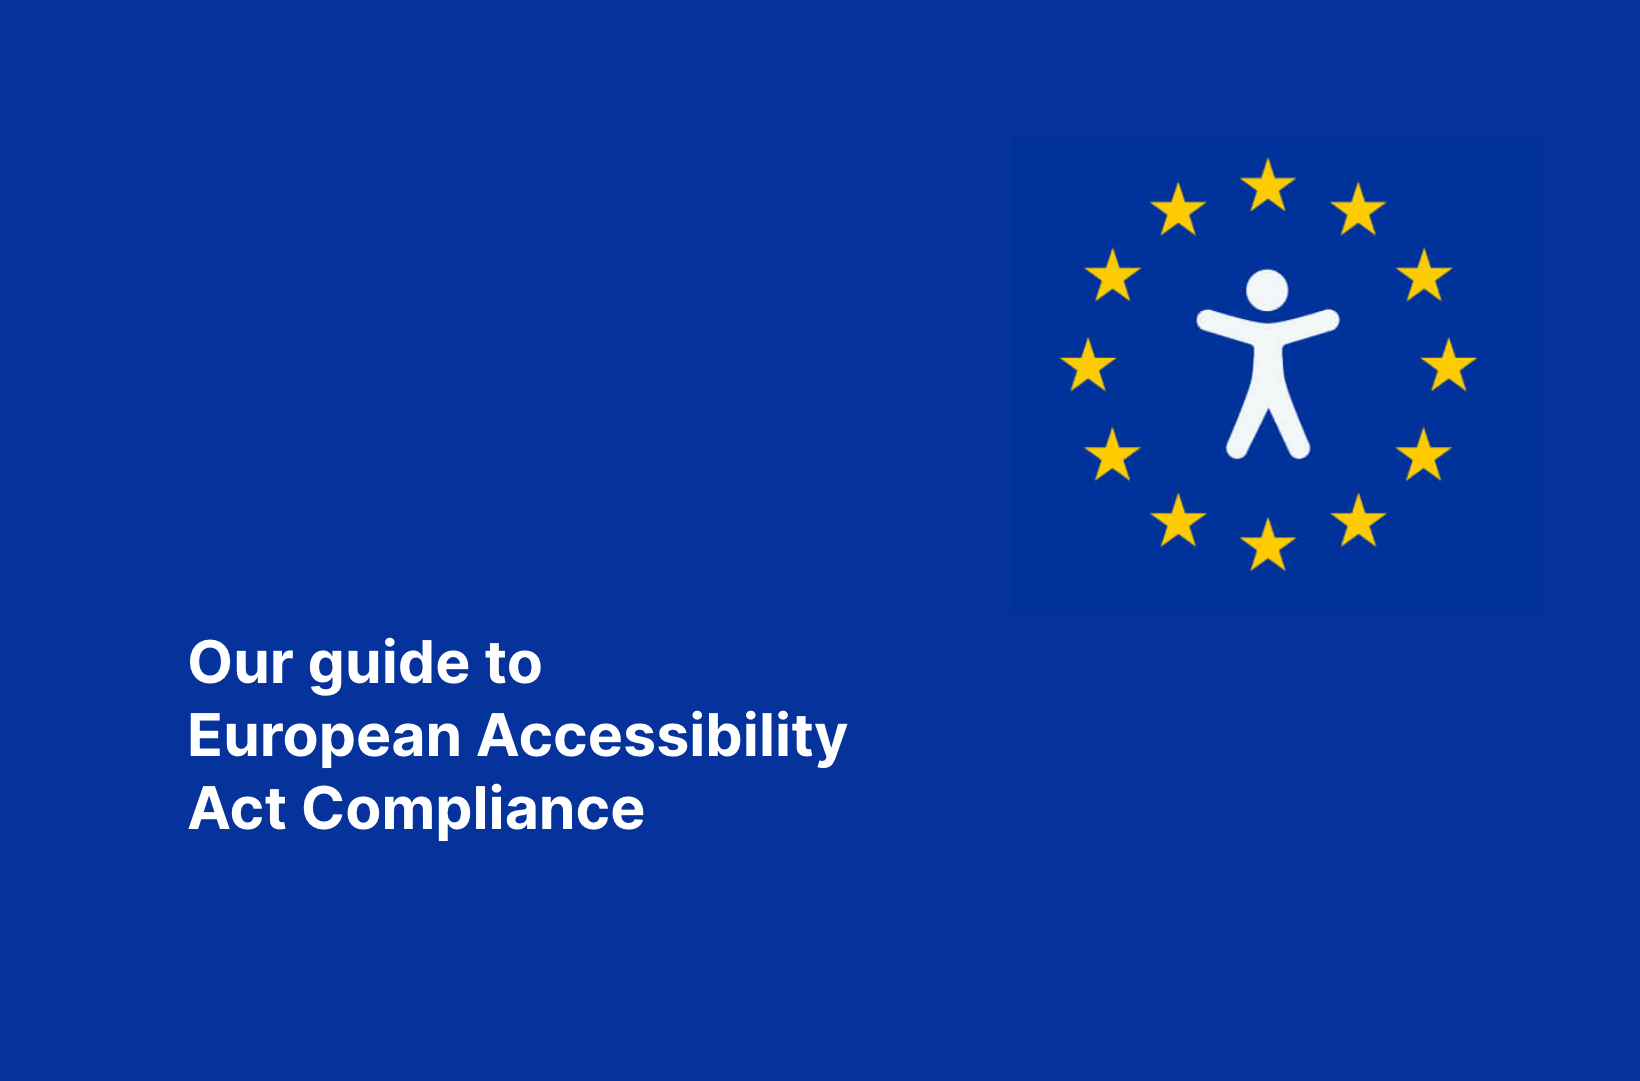 Our guide to European Accessibility Act Compliance